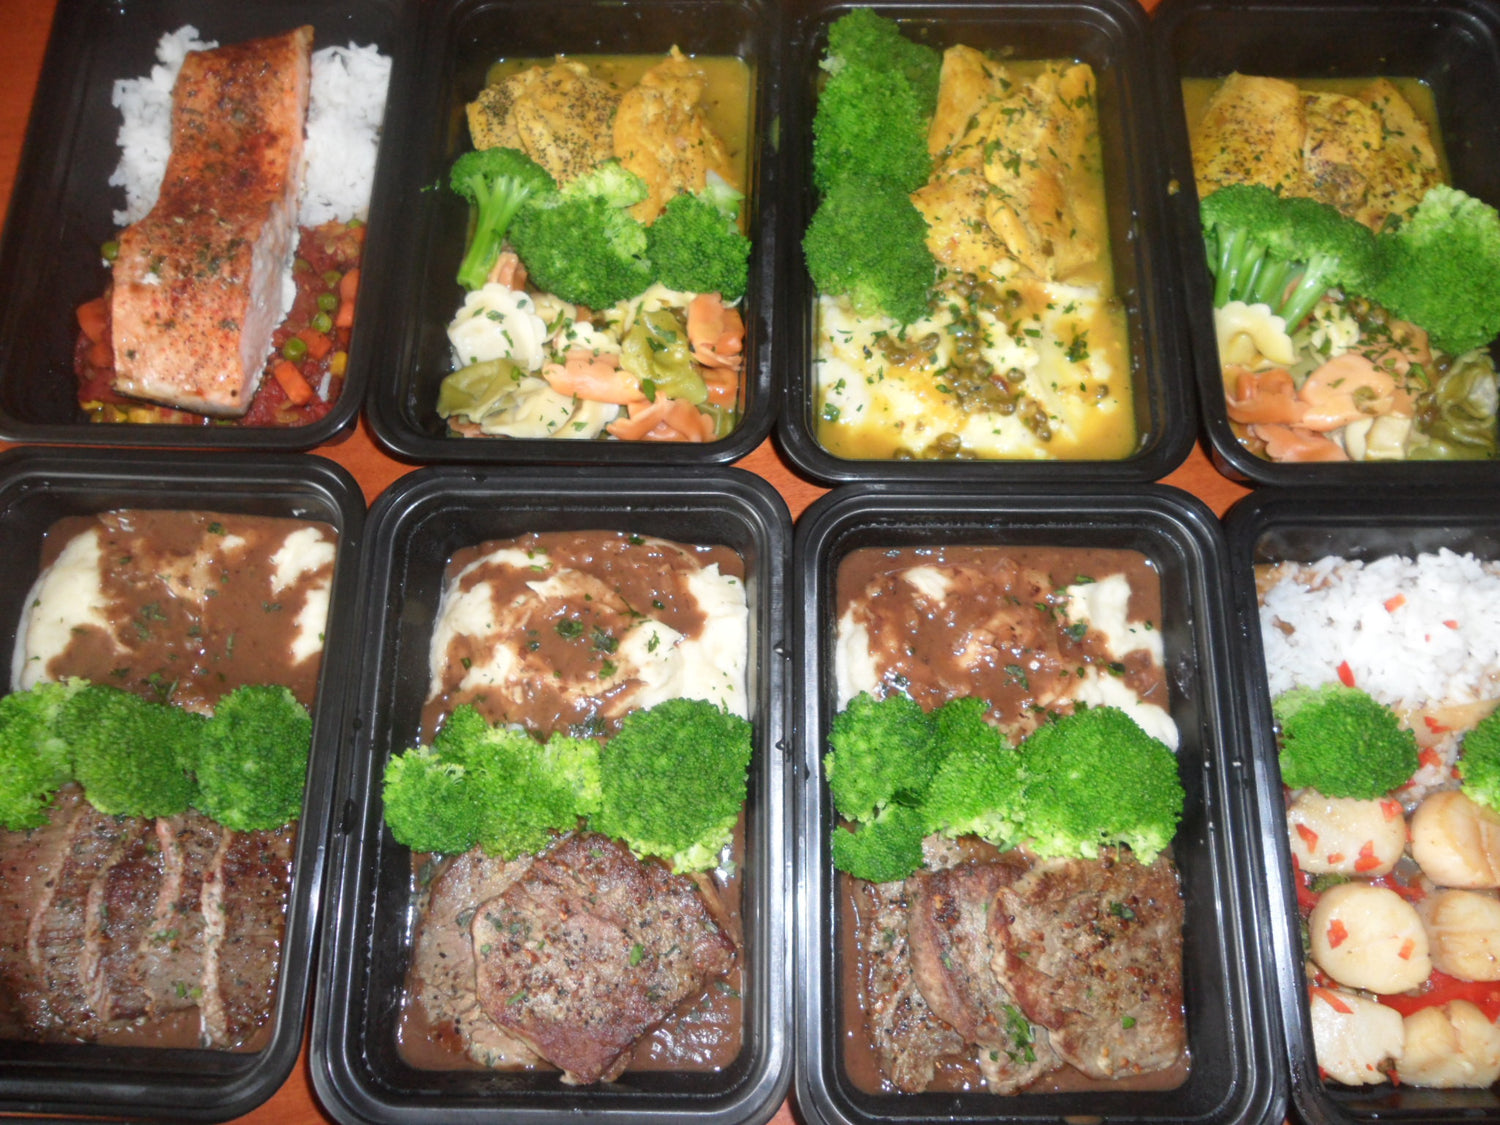 Chef prepared Meals Delivered. Serving Maryland, Northern Virginia, and Washington D.C. We offer healthy, fully cooked, and gourmet meals delivered to your door.